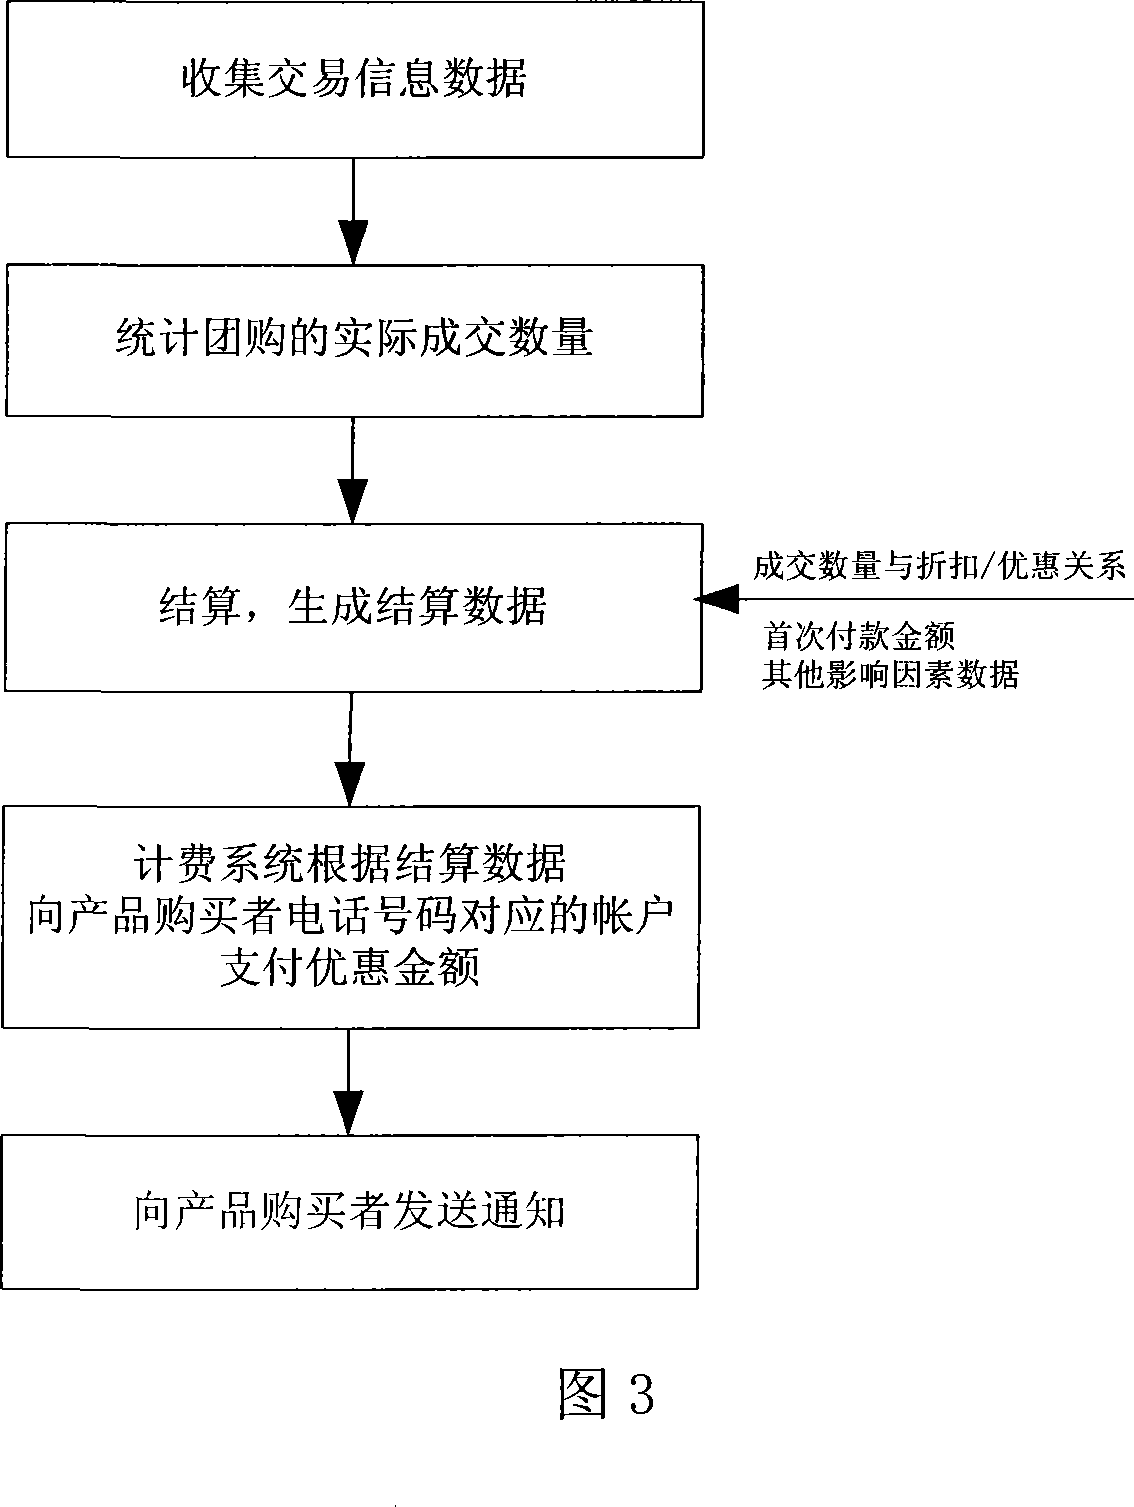 Group-buy settlement payments system and method with communicating technology